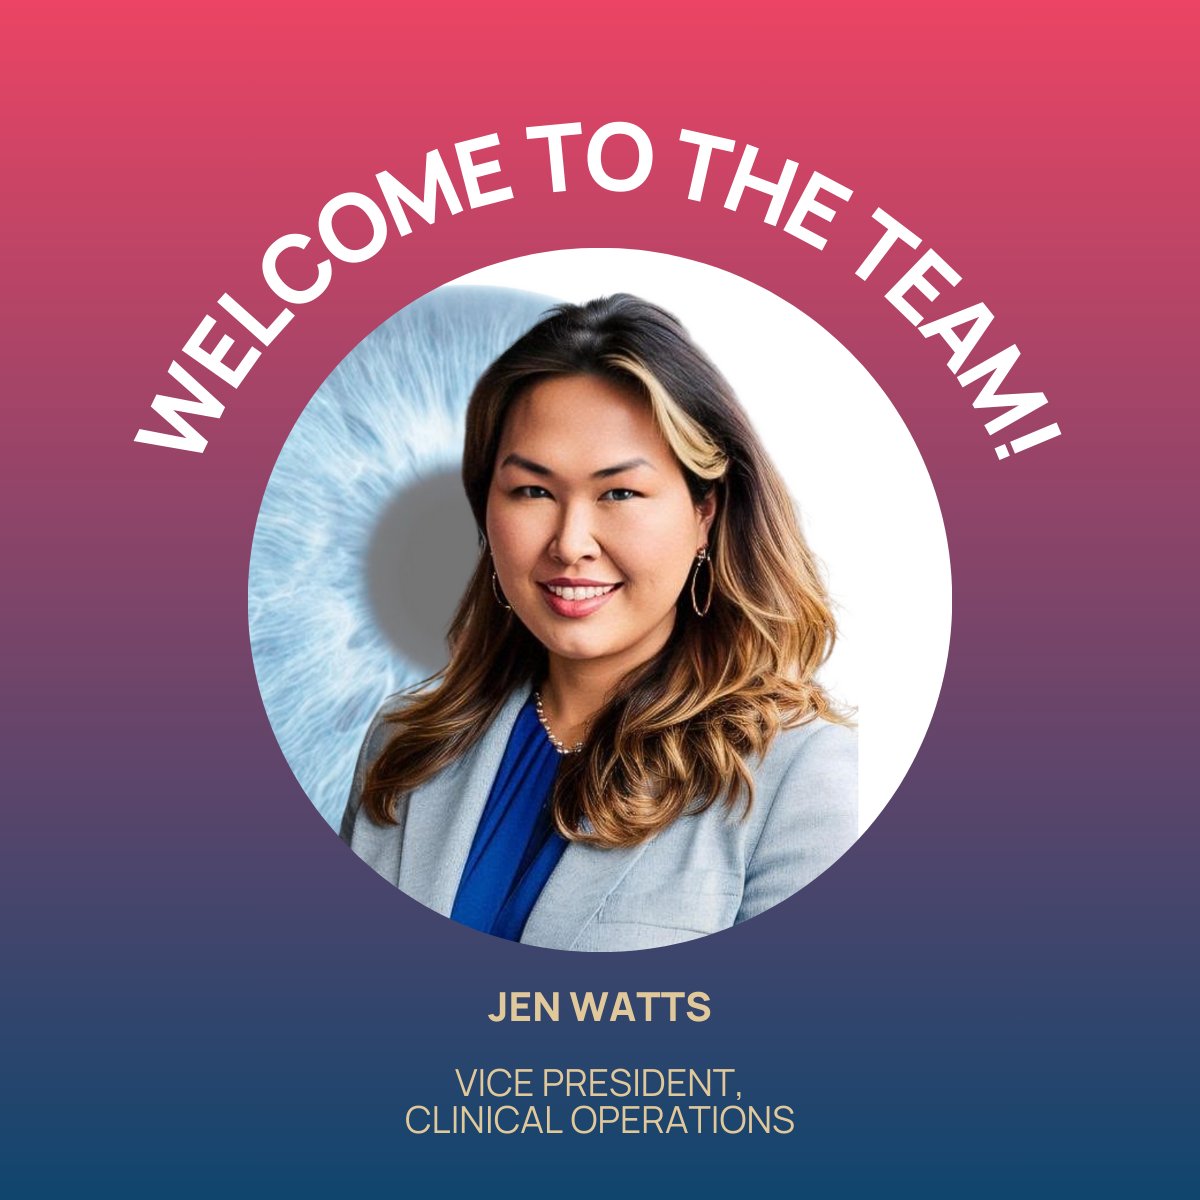 We welcome Jen to the team as our Vice President, Clinical Operations. 🎉 

#WelcomeAboard #GeneTherapy #ophthalmology #ComplementBiology #team #JobOpening #JoinUs